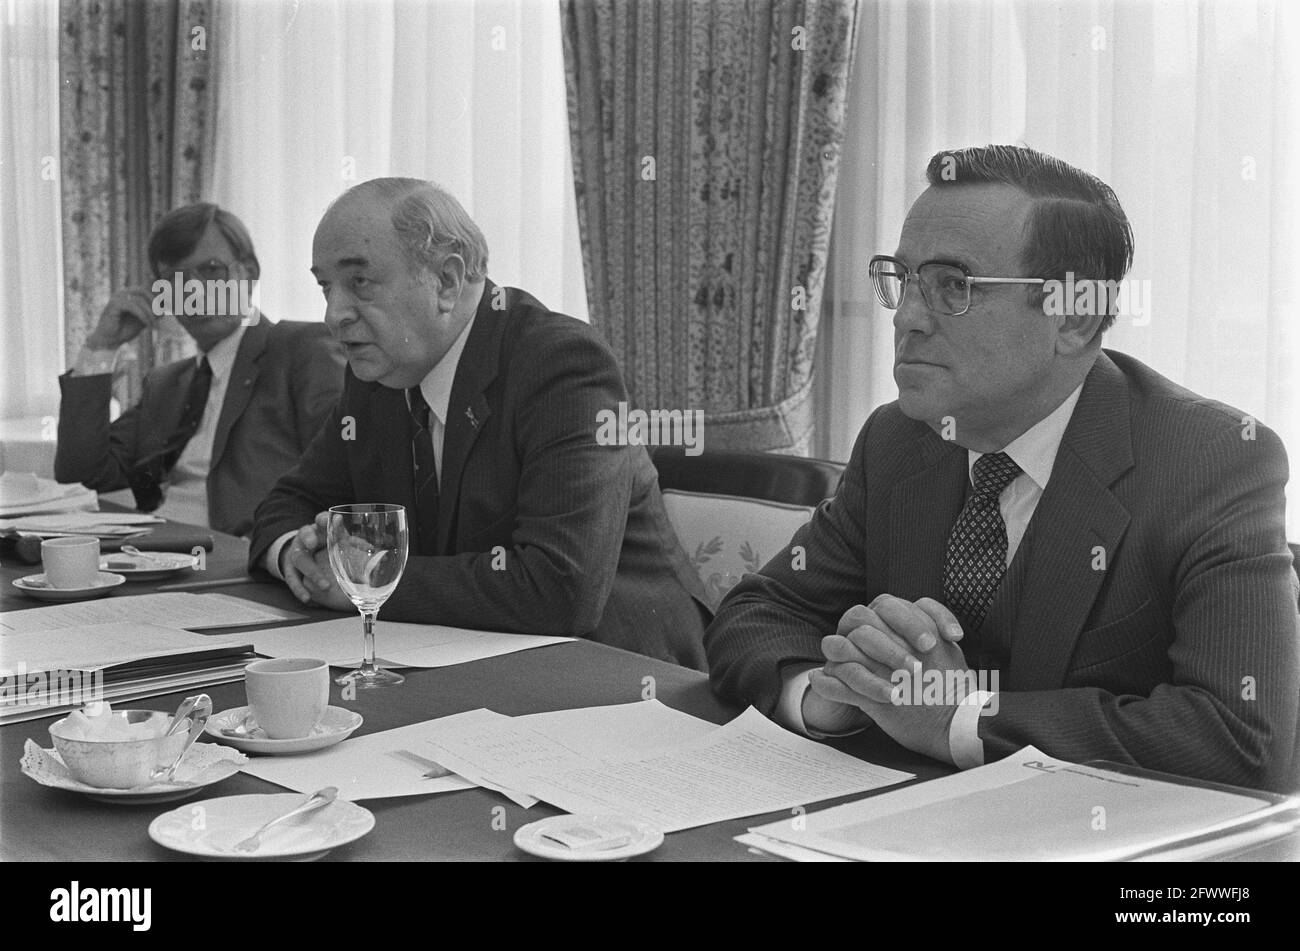 Assignment Hollander and Van der Mey, press conference Nationale Nederlanden, 6, 8: f.l.n.r. Van Rijn (l), Dr. Den Bakker, 7: Van Rijn, Den Bakker, Van Zwol, May 6, 1982, press conferences, The Netherlands, 20th century press agency photo, news to remember, documentary, historic photography 1945-1990, visual stories, human history of the Twentieth Century, capturing moments in time Stock Photo